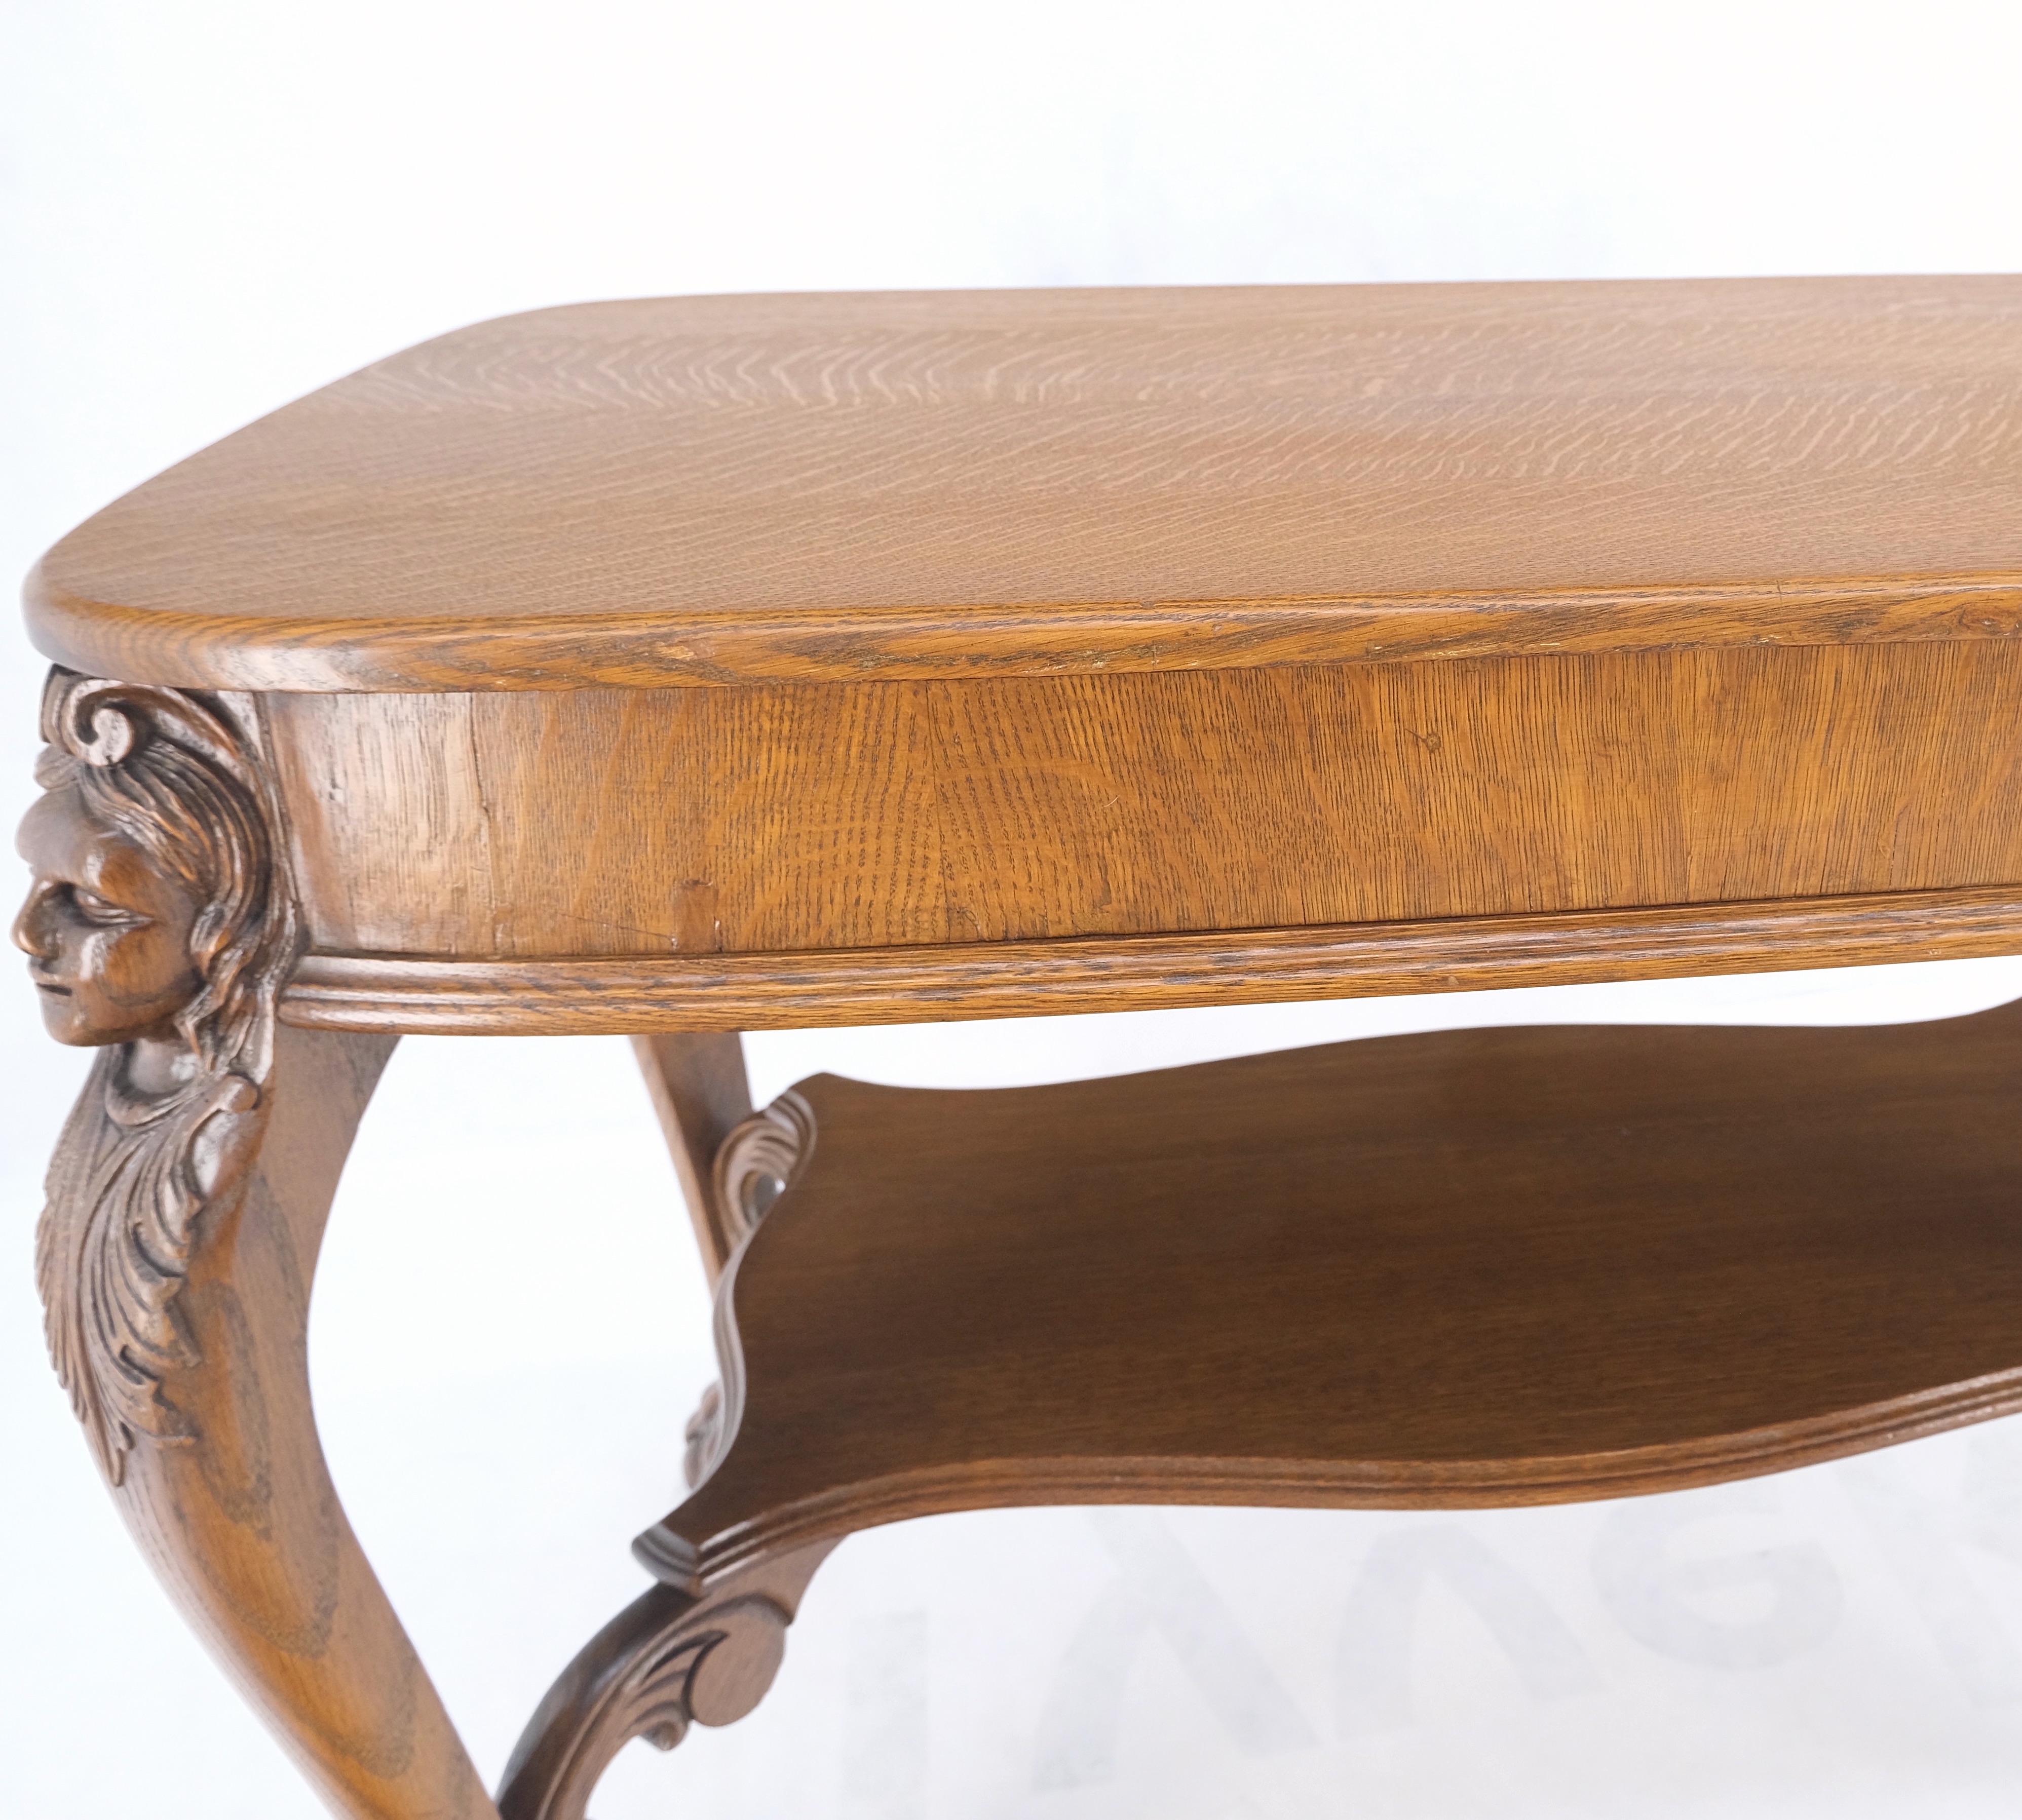 Art Nouveau Style Carved Faces Ball & Claw Feet Rounded Oak Desk Writing Table For Sale 5